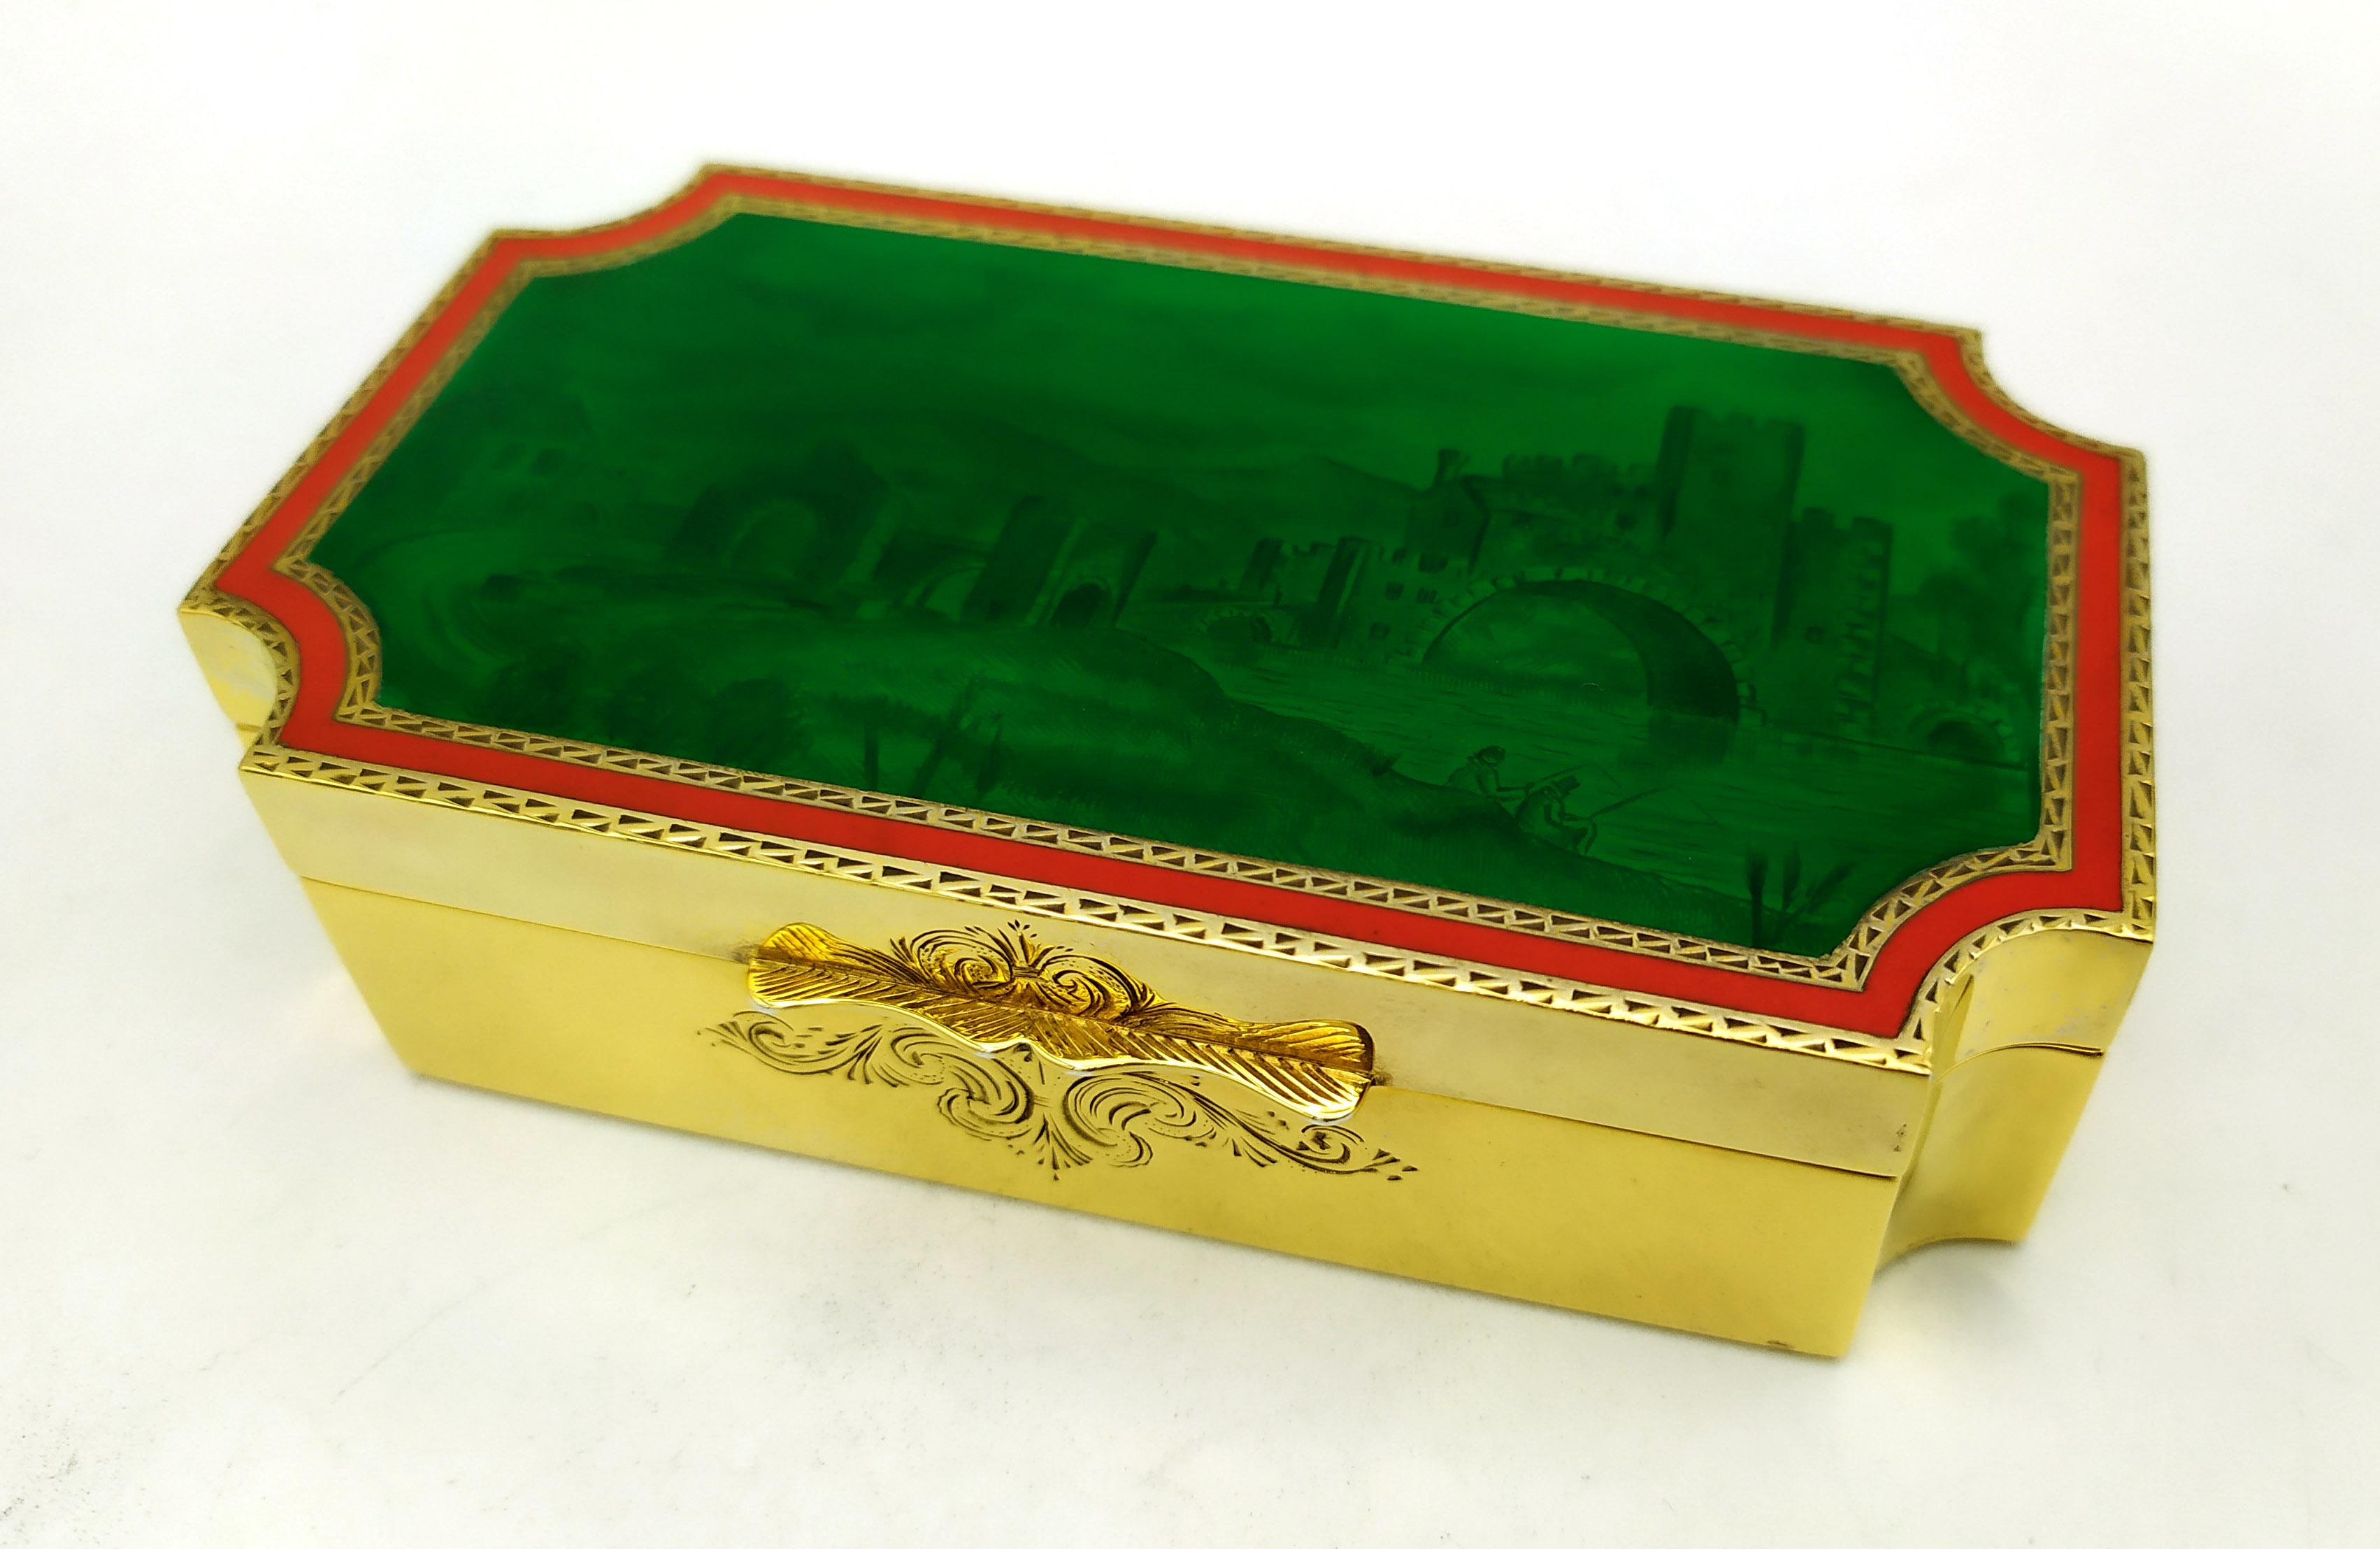 Rectangular table box with concave corners in 925/1000 sterling silver gold plated with translucent fired enamel on fine hand engraving of a landscape with ruins. Contemporary modern style. Dimensions cm. 6 x 11 x 2.8. Weight gr. 275. Designed by